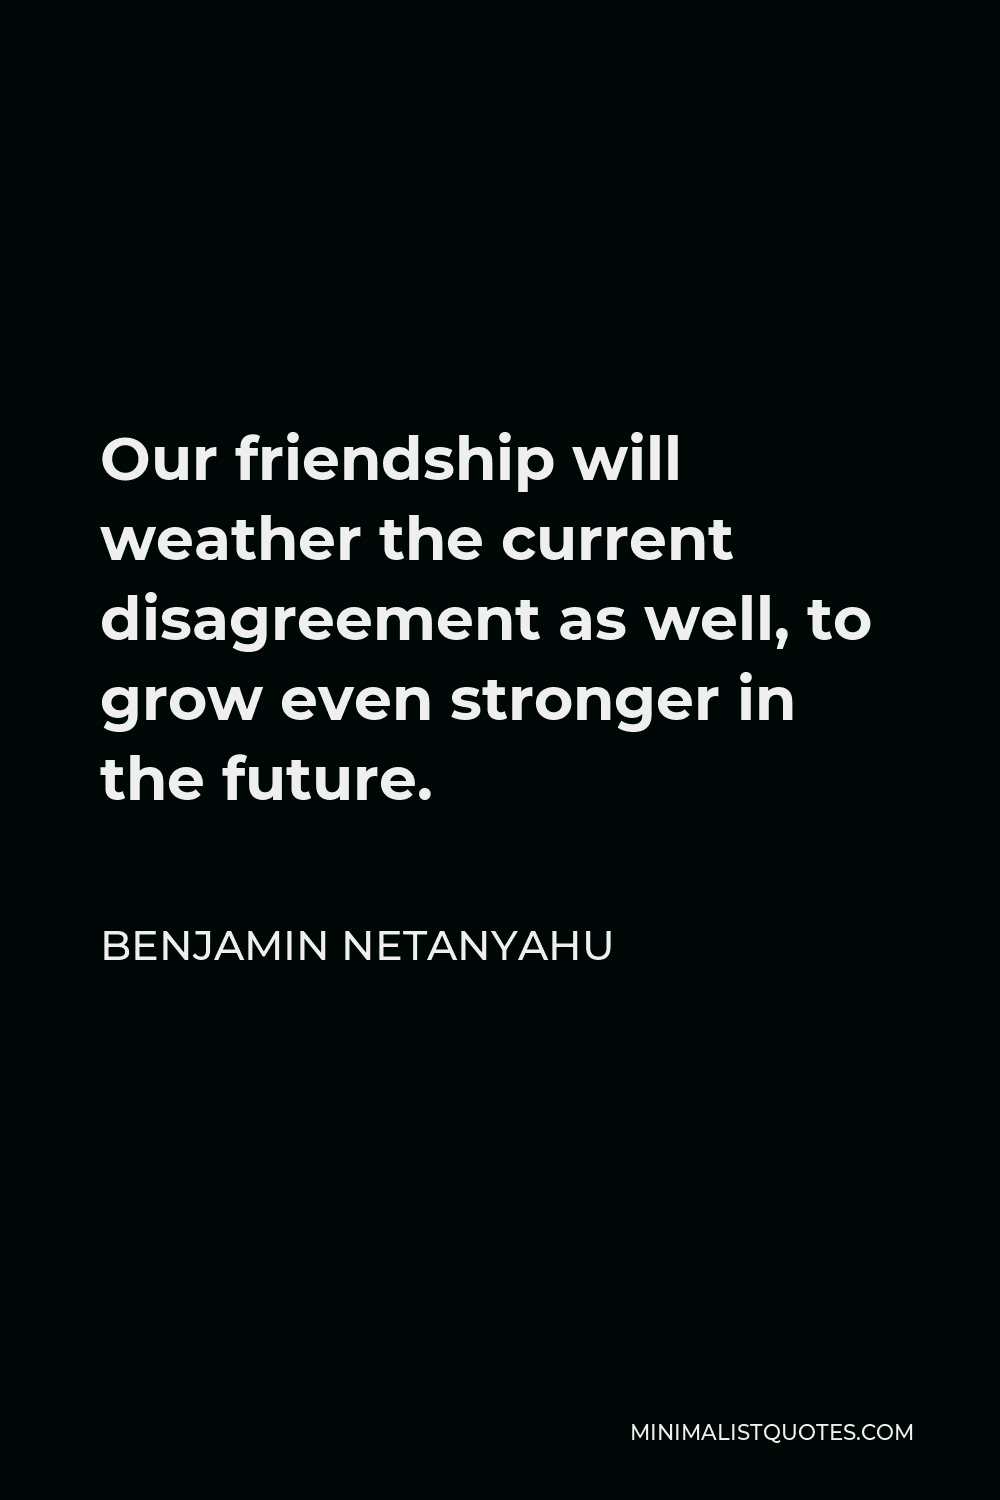 Benjamin Netanyahu Quote - Our friendship will weather the current disagreement as well, to grow even stronger in the future.